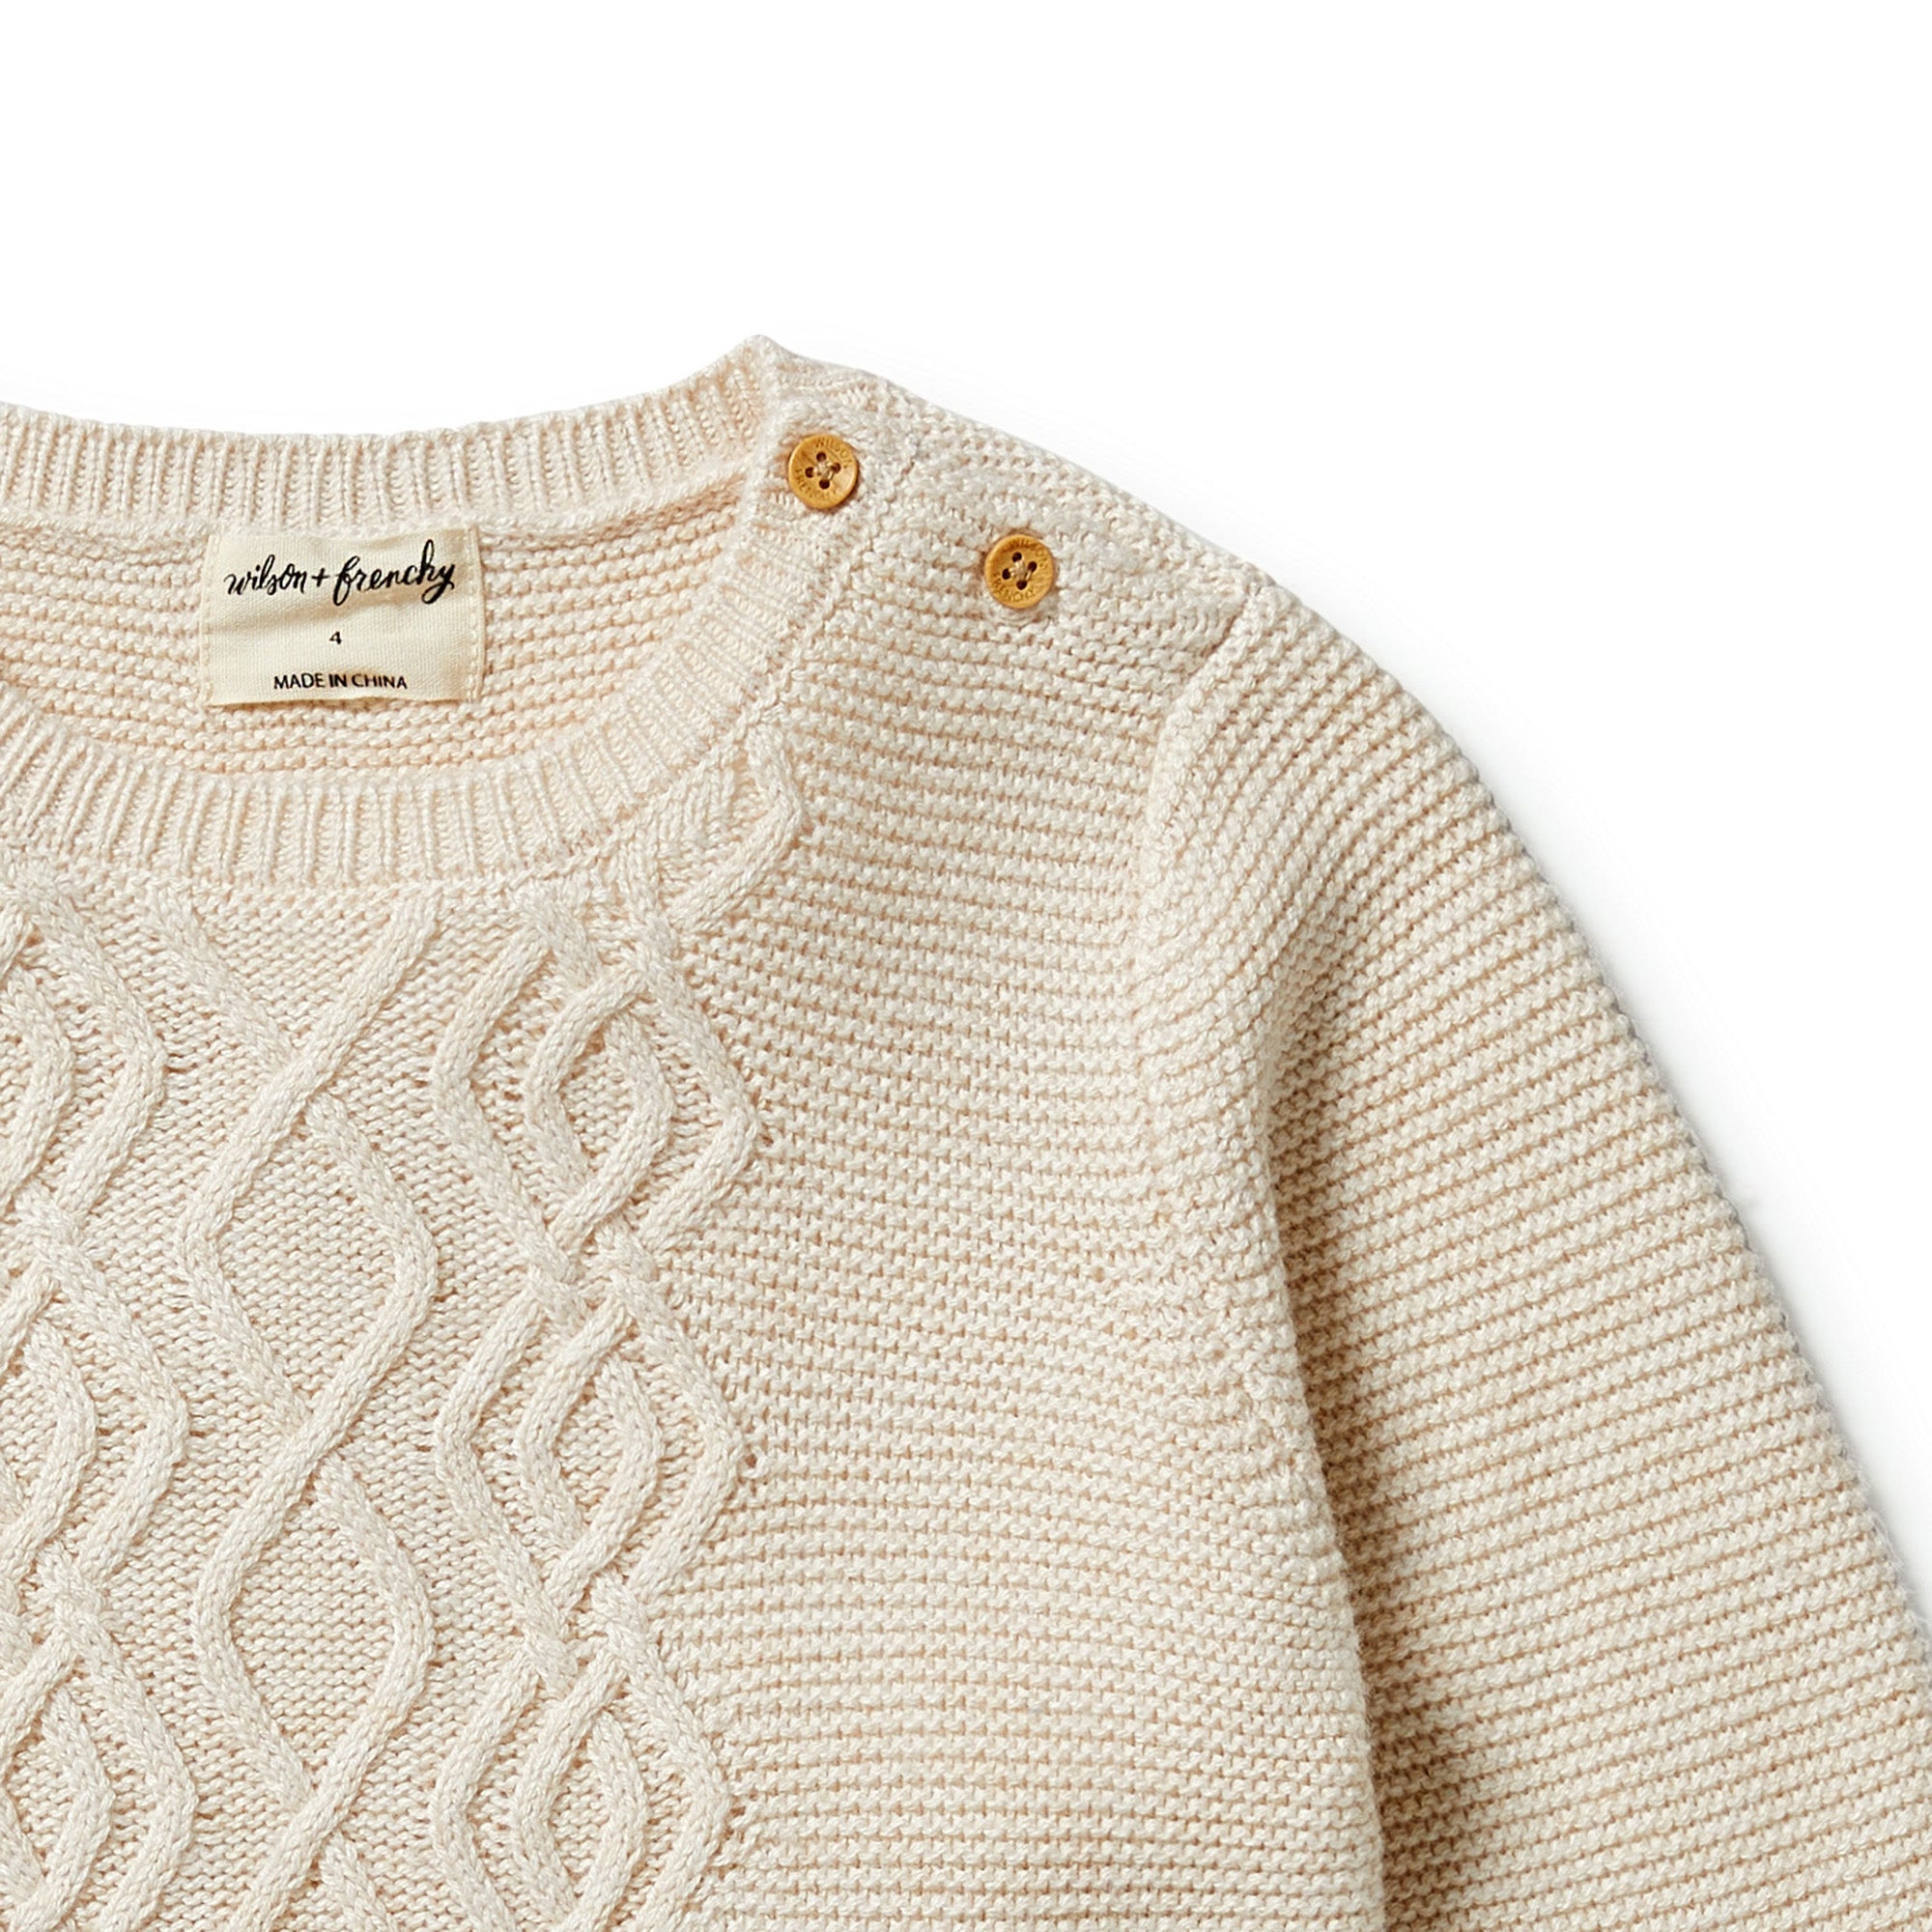 Wilson & Frenchy - Knitted Cable Jumper - Sand Melange (3 Yrs)